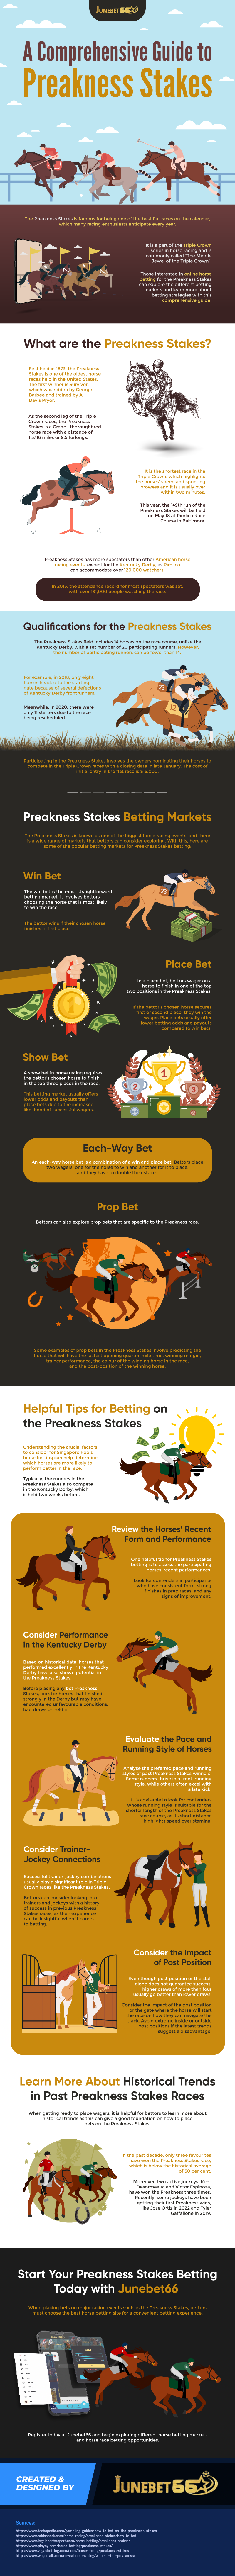 A Comprehensive Guide to Preakness Stakes Infographic Image